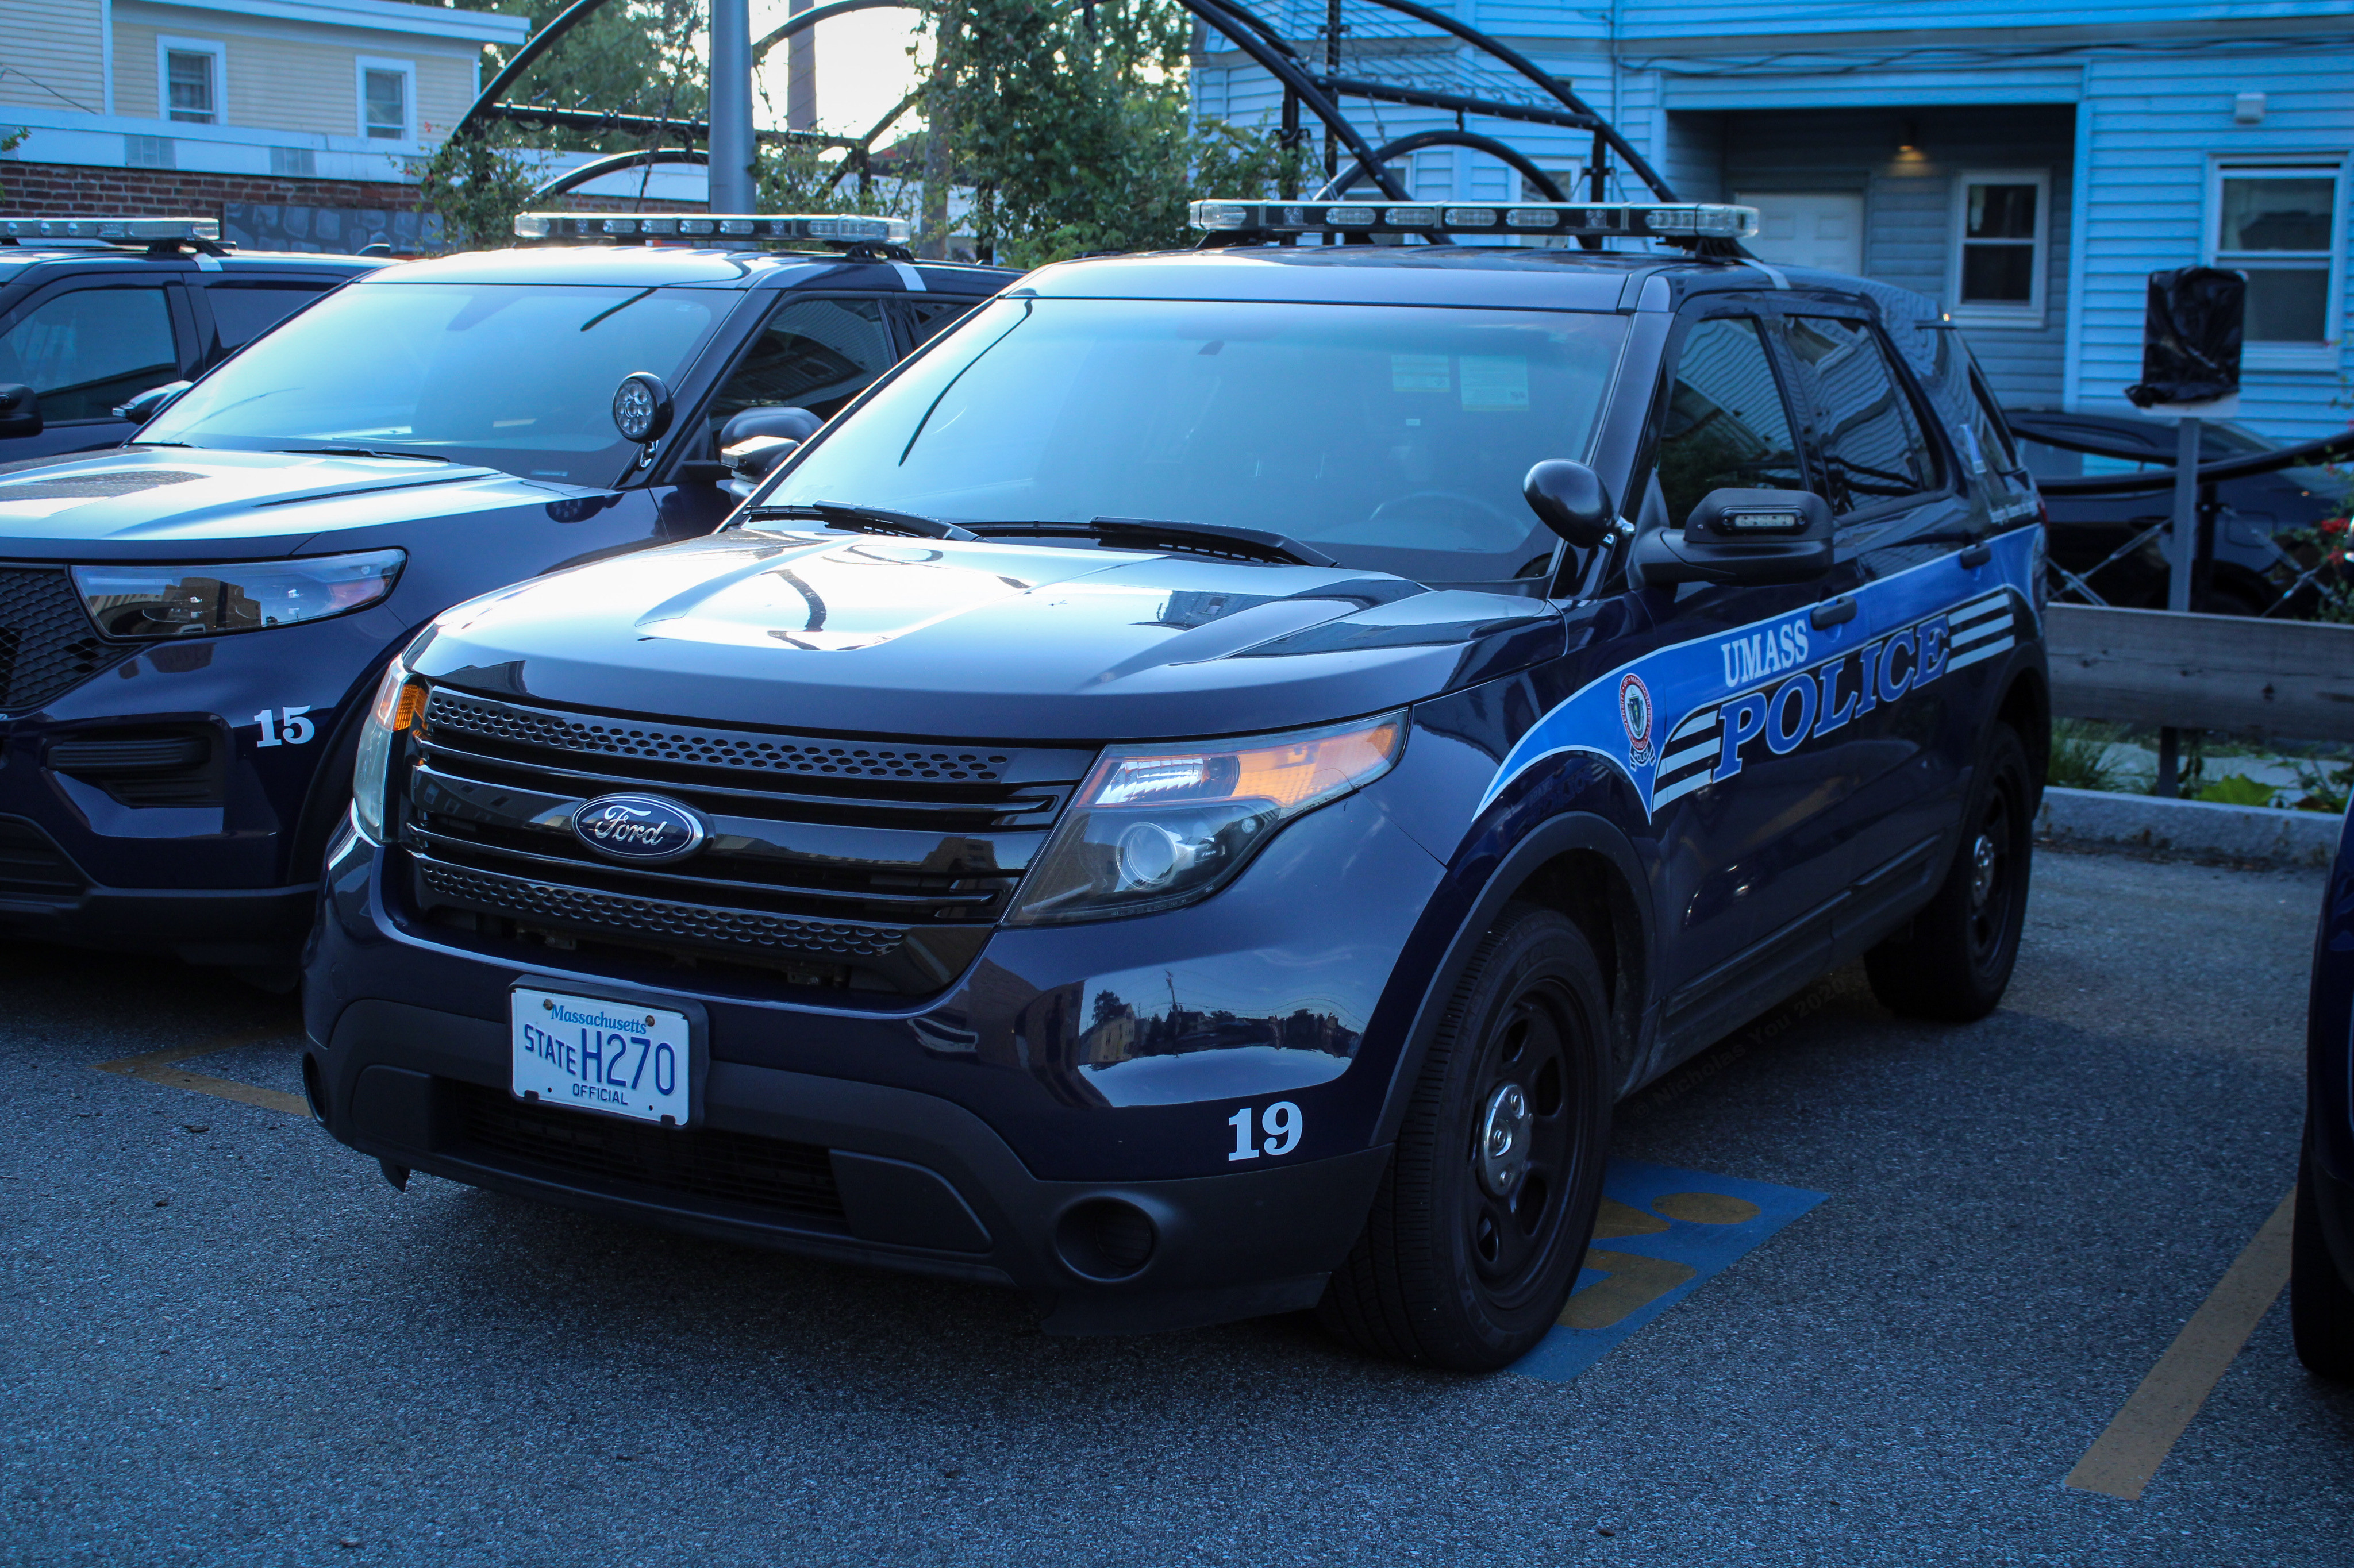 A photo  of University of Massachusetts Lowell Police
            Cruiser 19, a 2013-2015 Ford Police Interceptor Utility             taken by Nicholas You